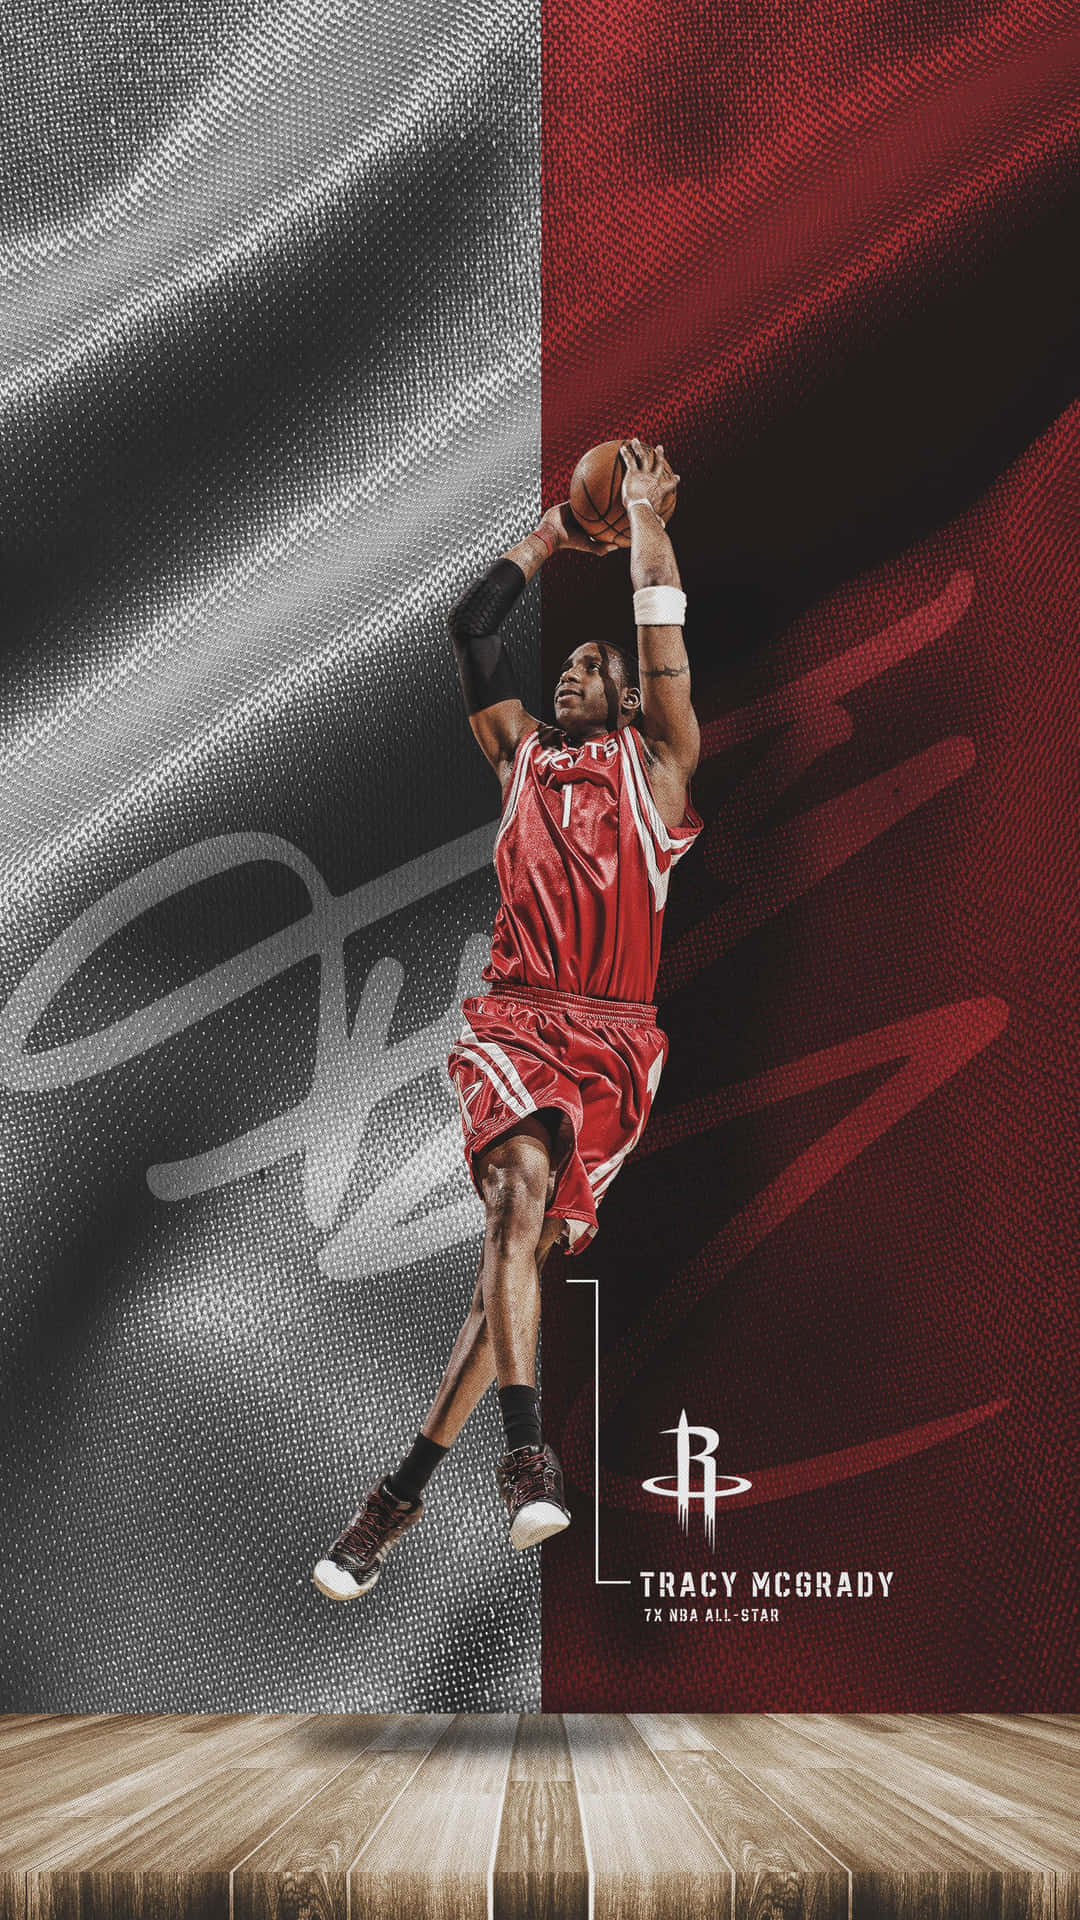 Download Image Tracy McGrady - Legendary Basketball Player Wallpaper